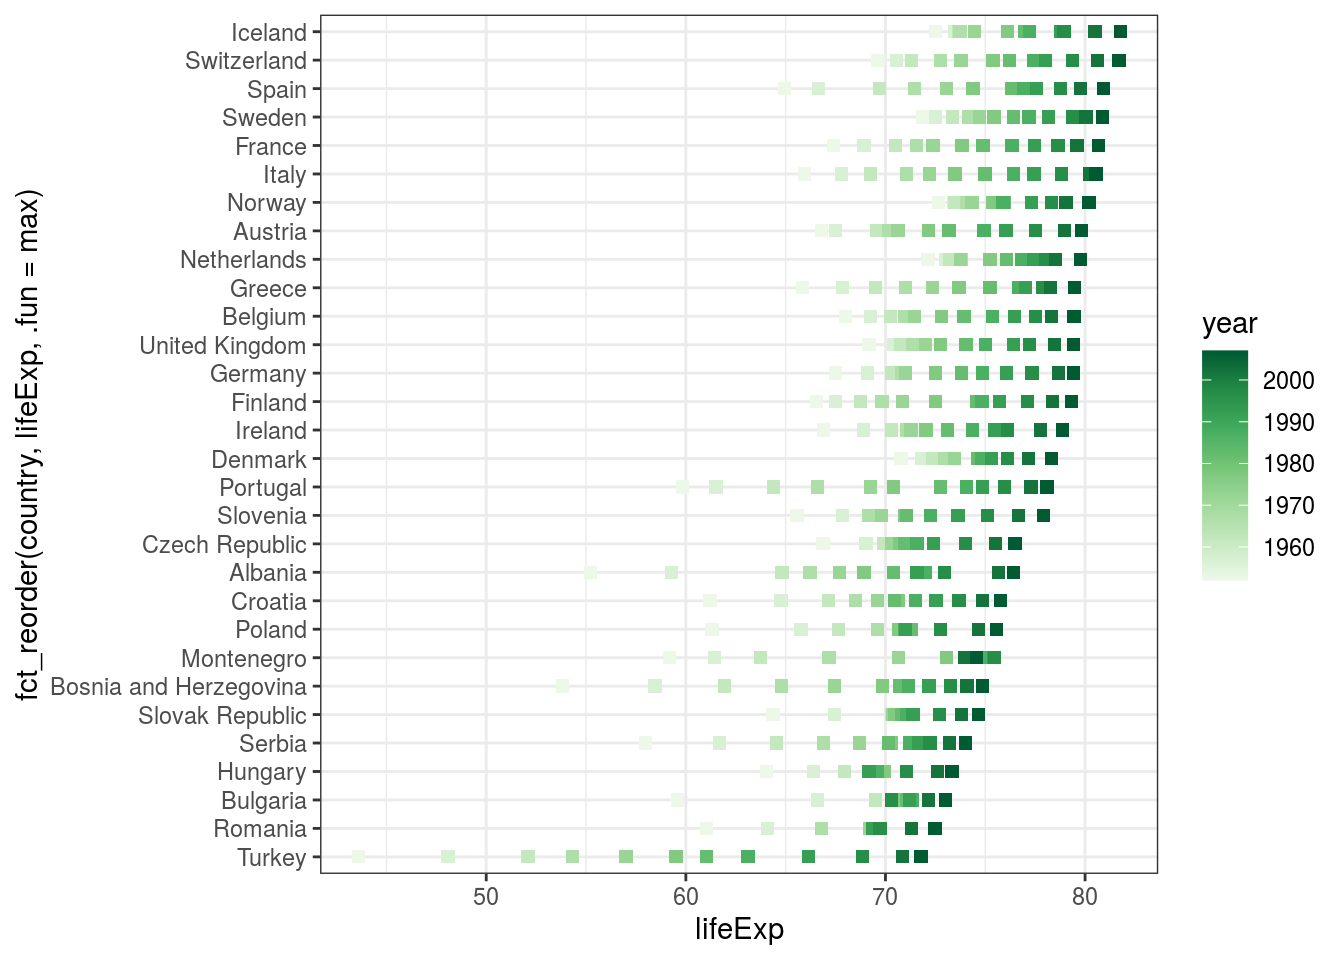 Increase in European life expectancies over time. Using `fct_reorder()` to order the countries on the y-axis by life expectancy (rather than alphabetically which is the default).